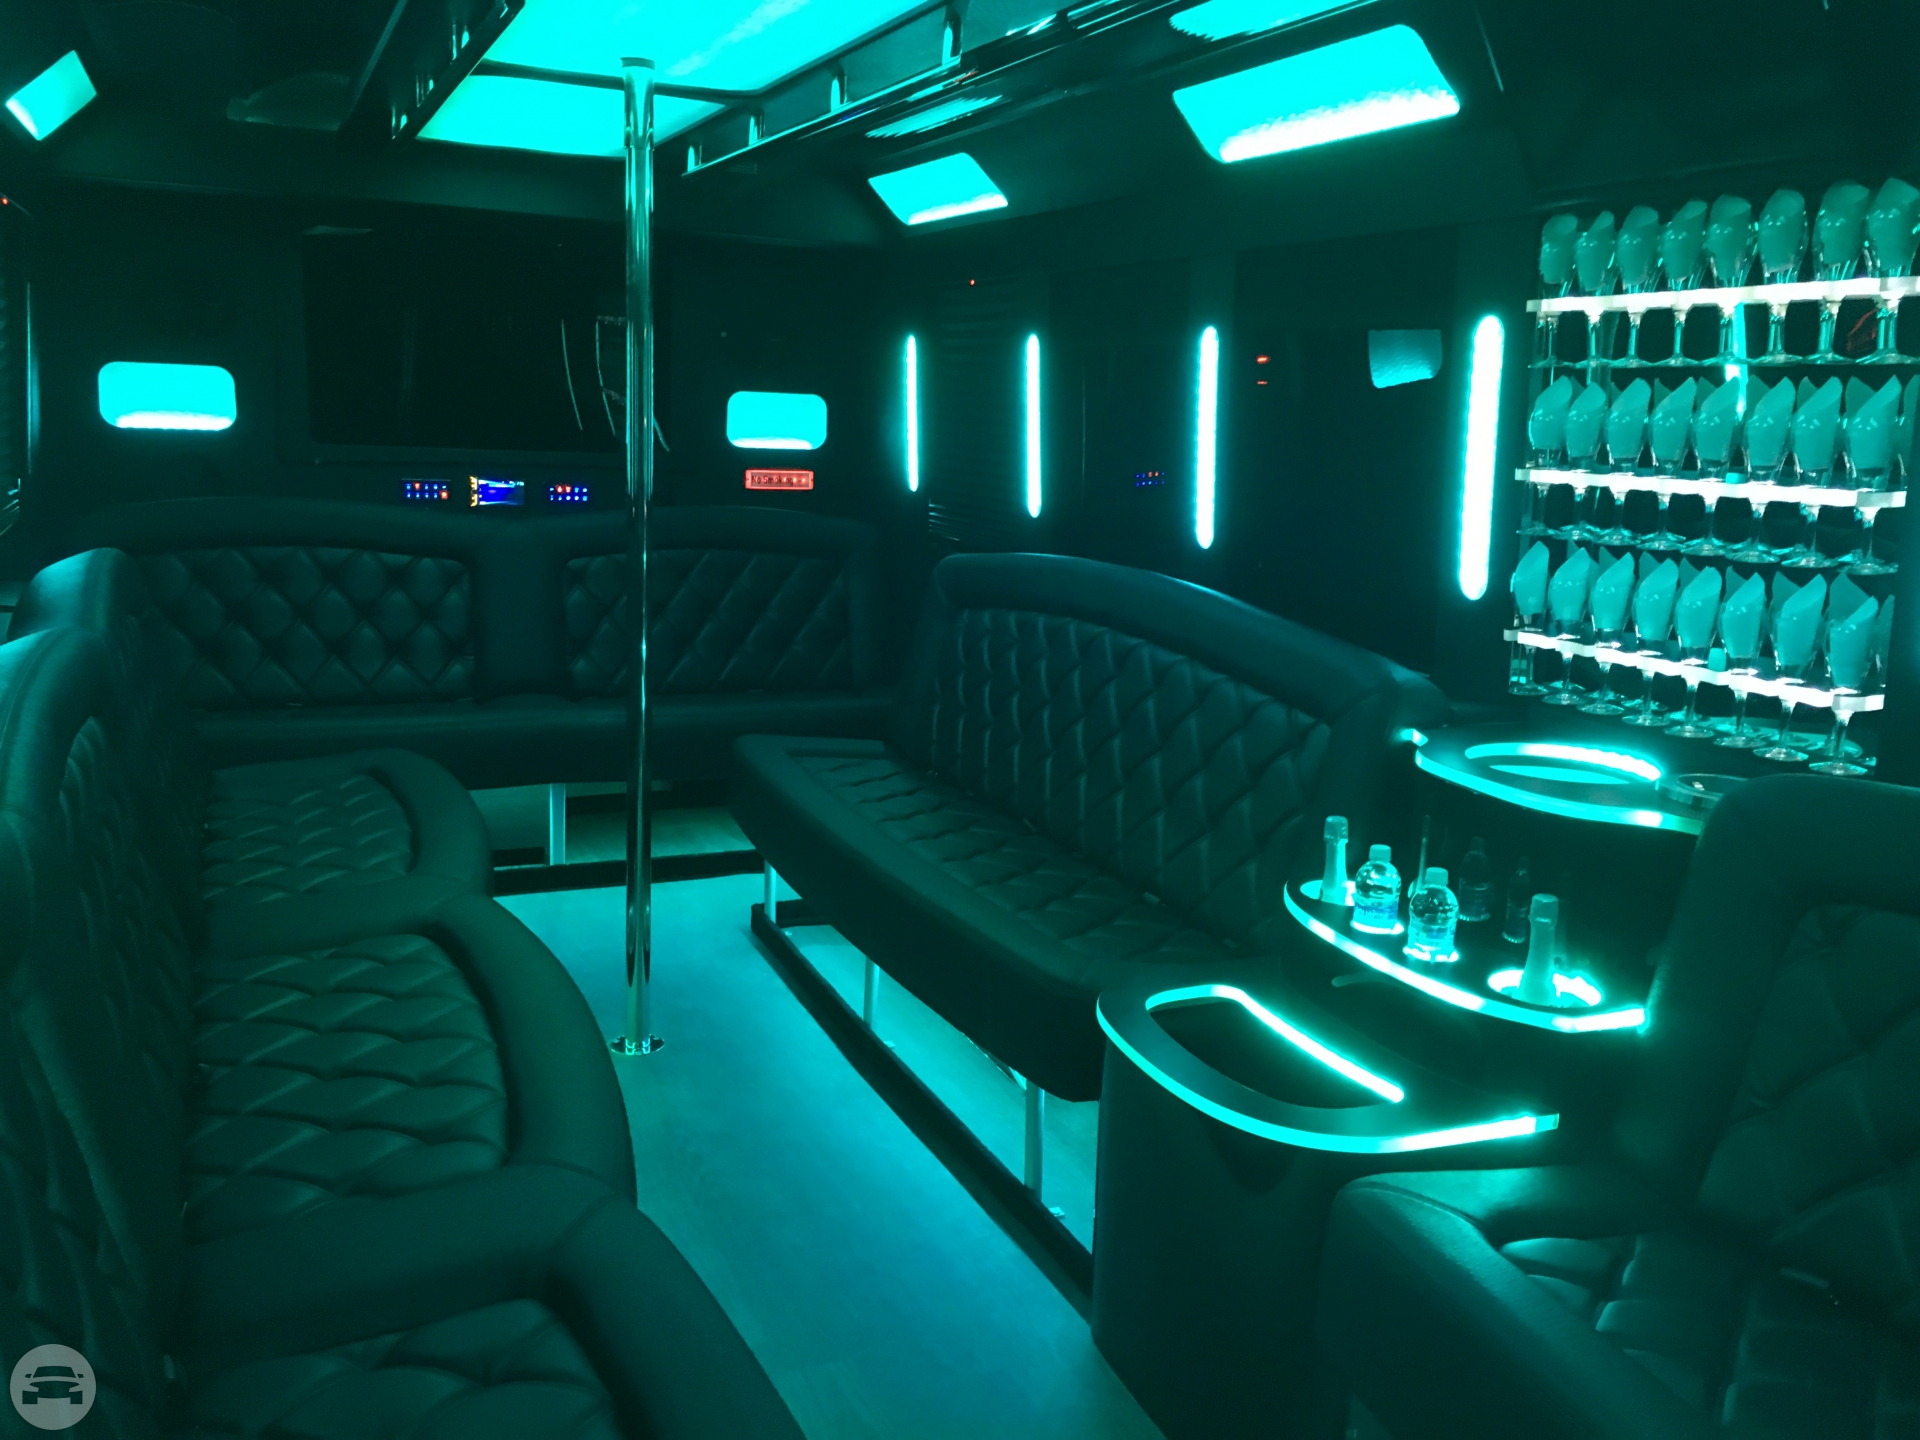 2016 ford party bus 
Party Limo Bus /
San Diego, CA

 / Hourly $0.00
